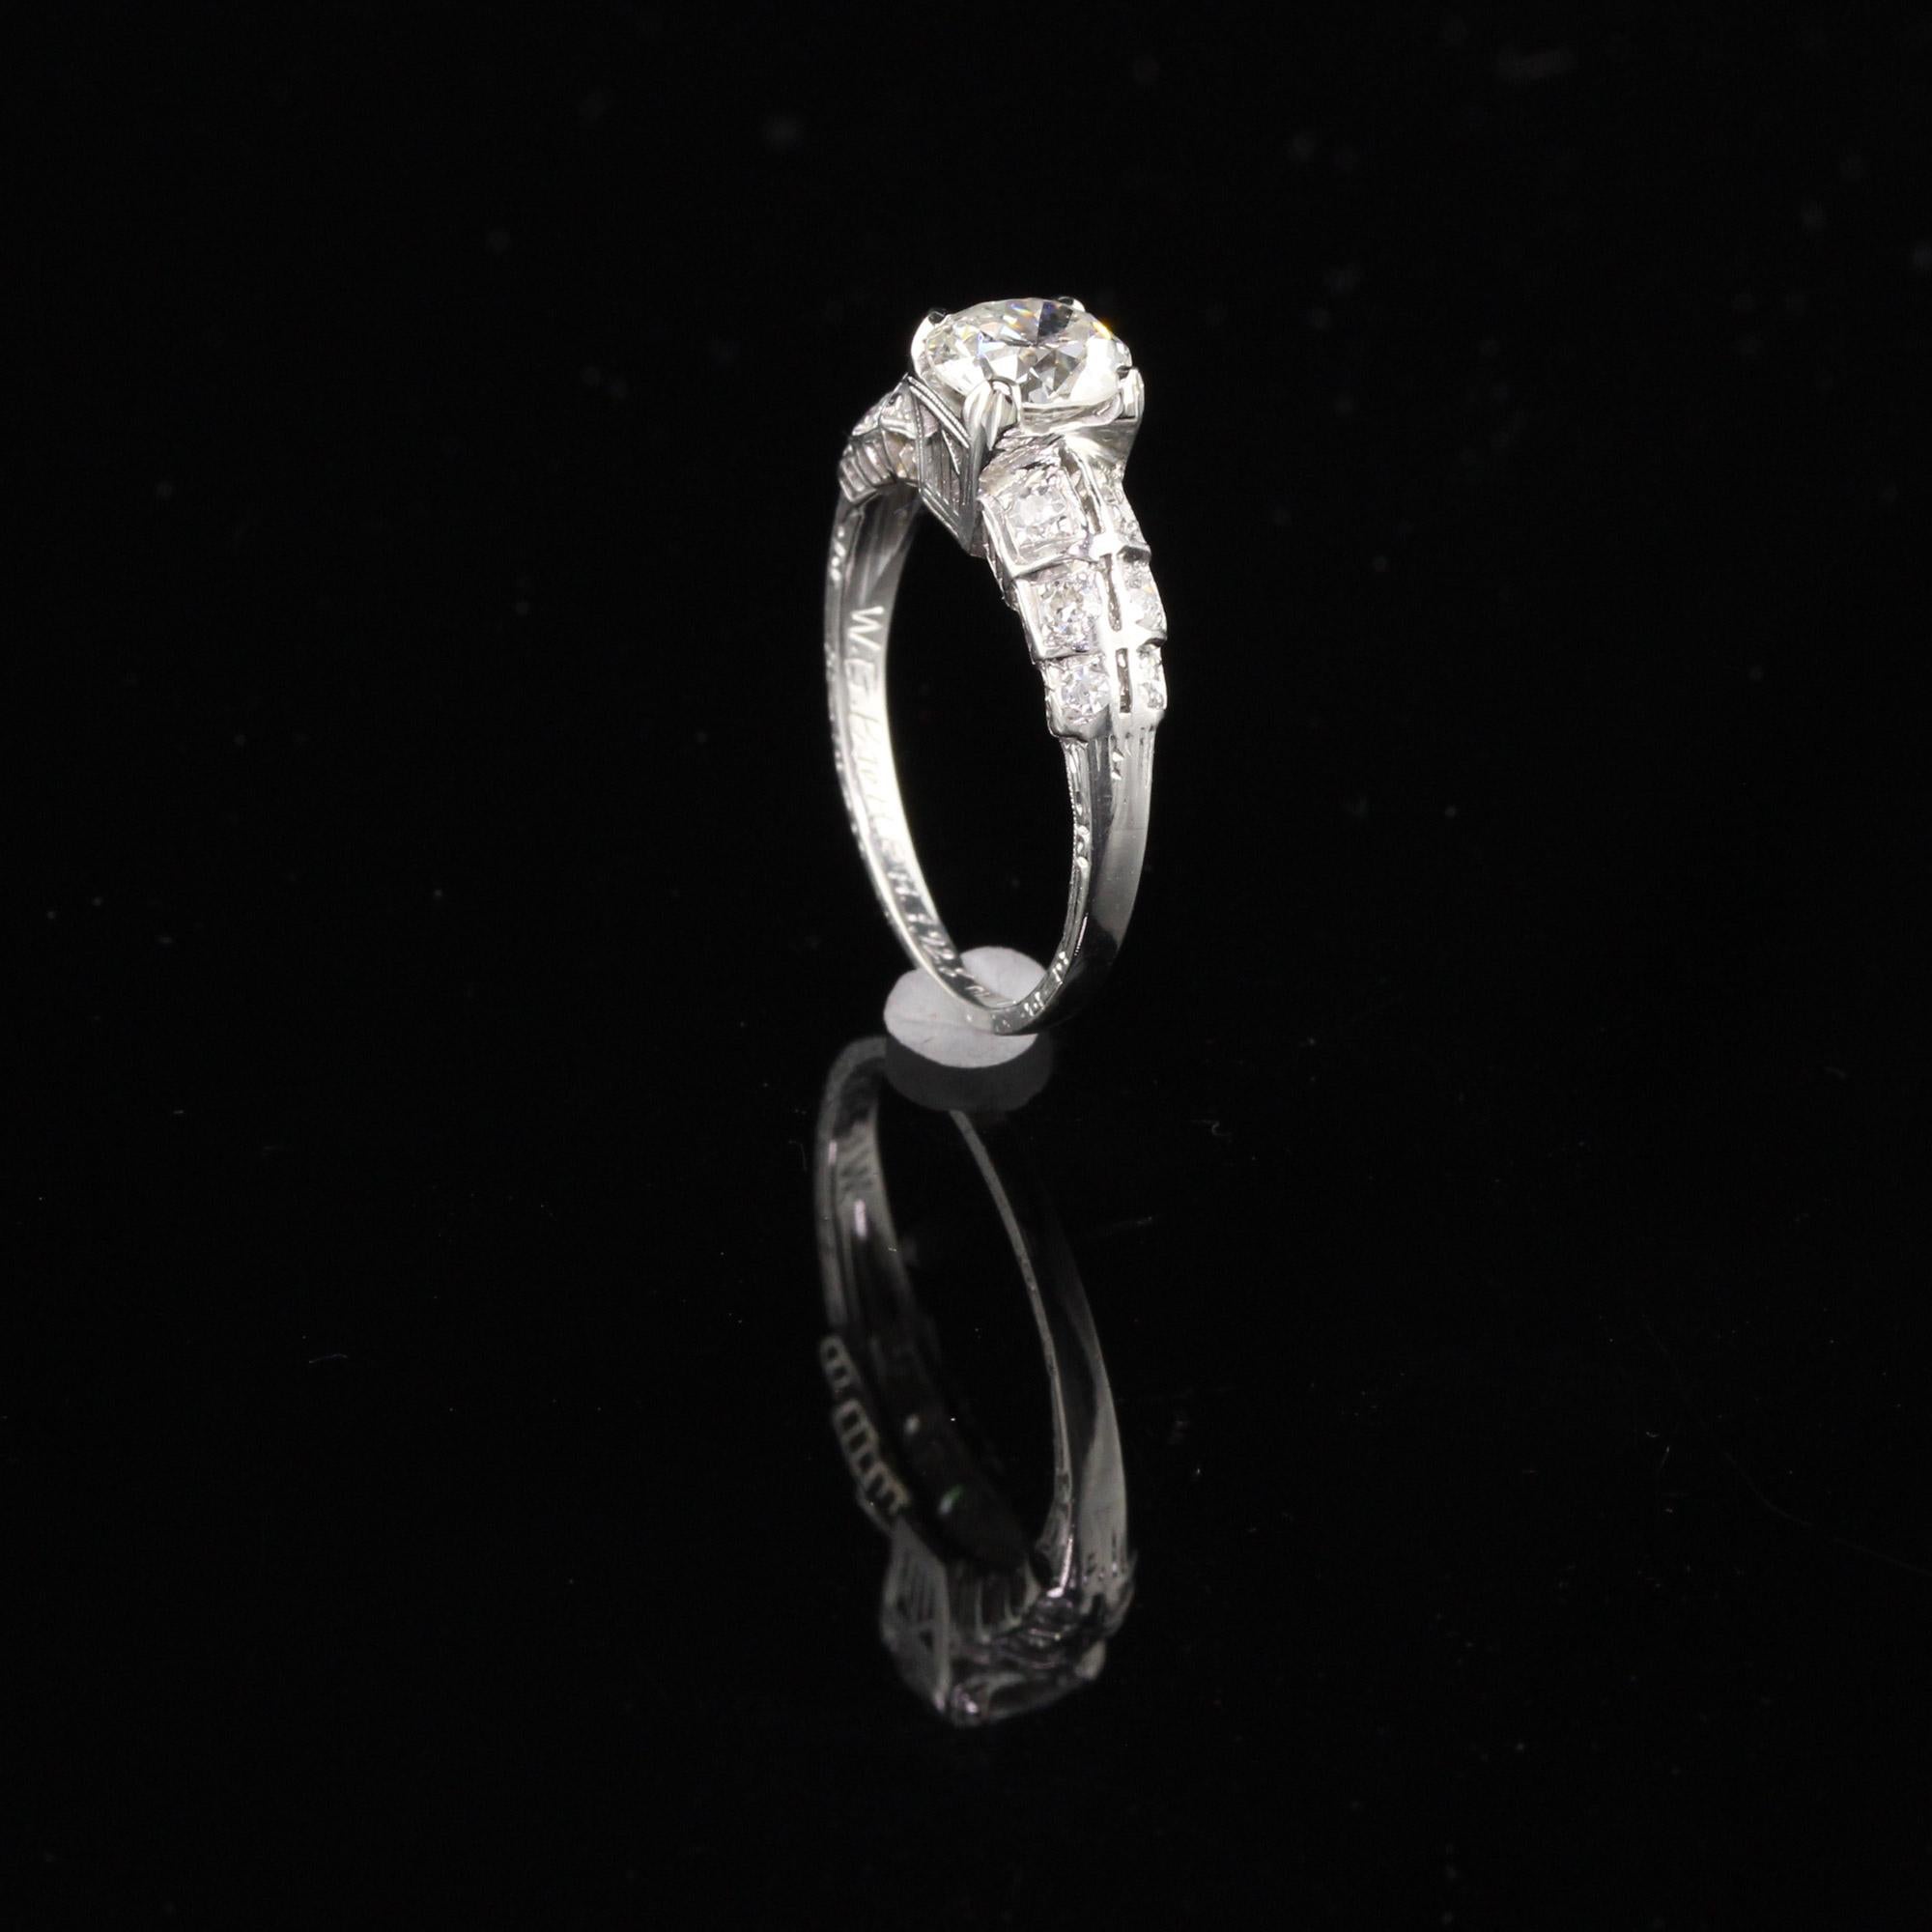 Antique Art Deco Platinum and Diamond Engagement Ring In Good Condition For Sale In Great Neck, NY